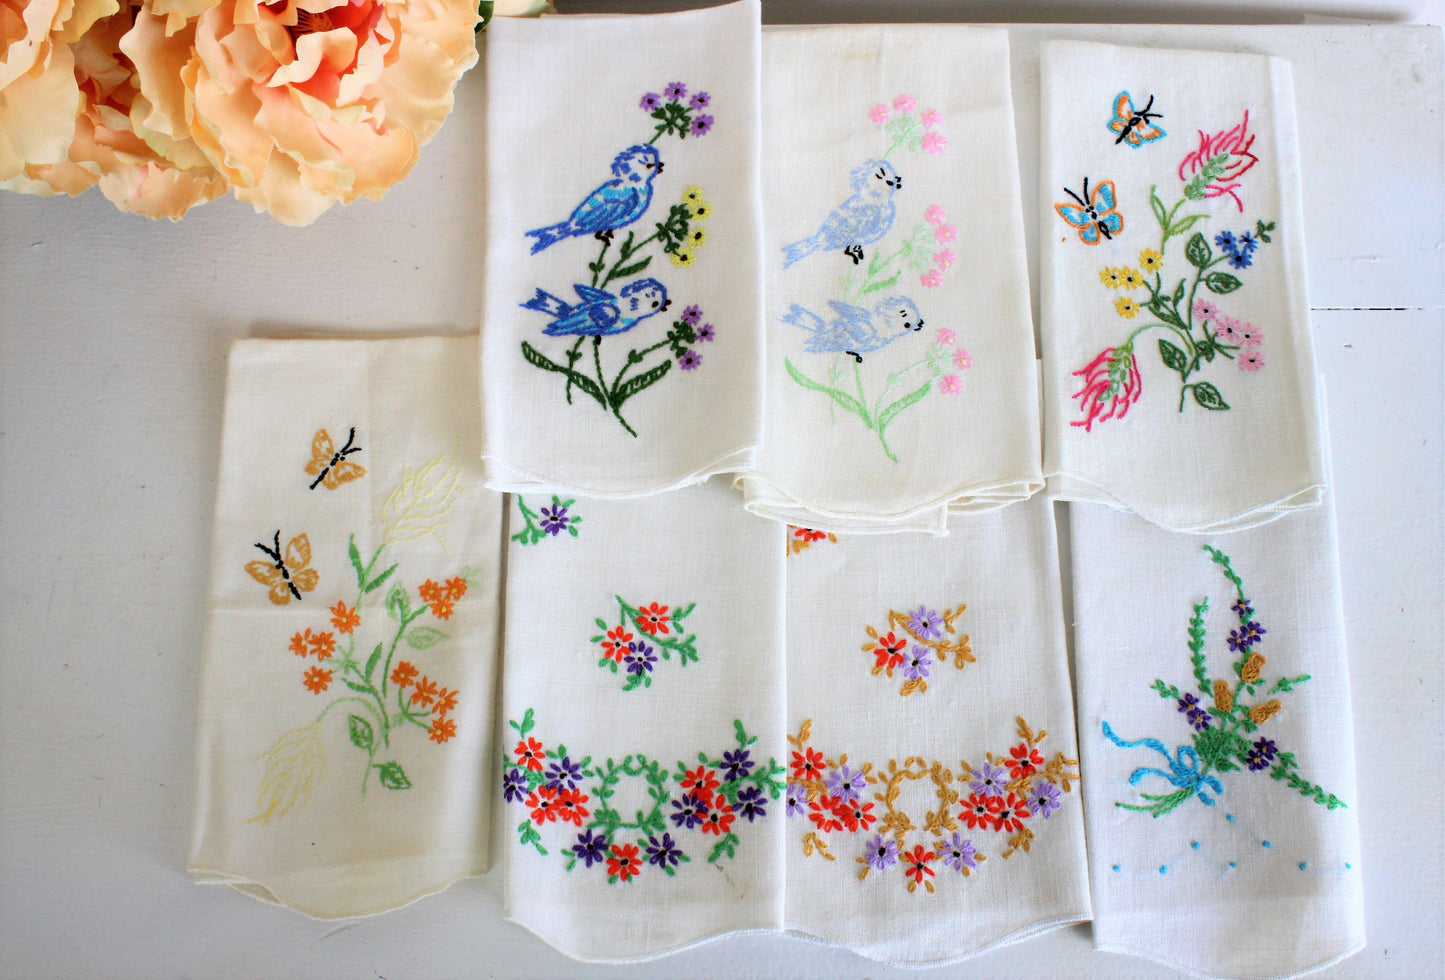 Vintage 1960s Linen Tea Towels, Embroidered With Flowers, Birds, Butterflies